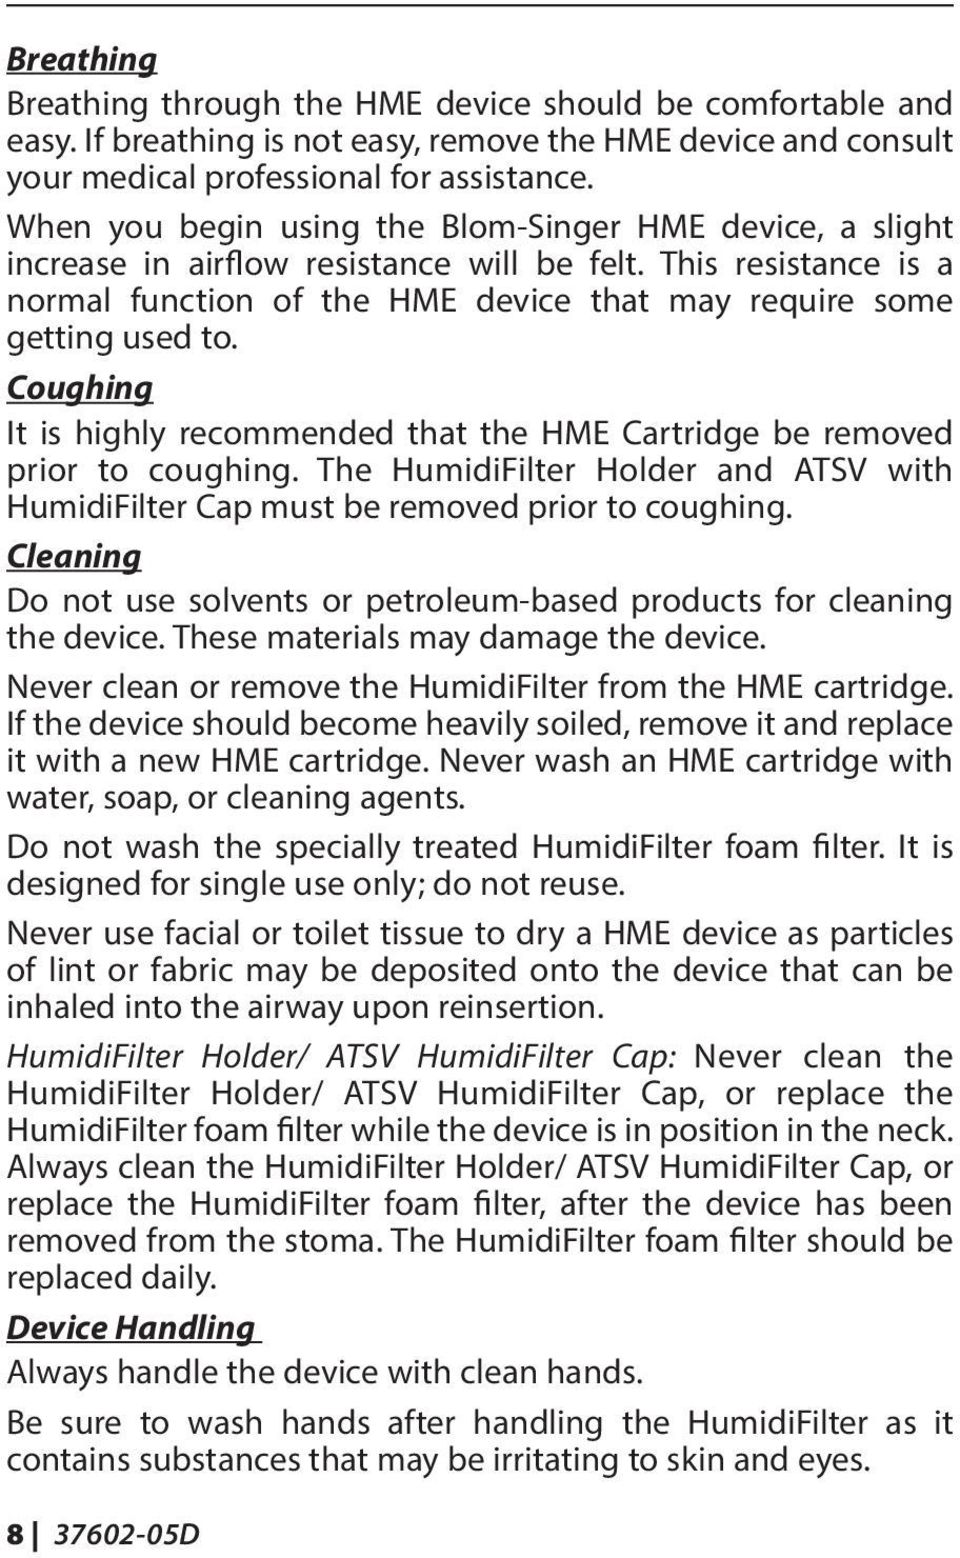 Coughing It is highly recommended that the HME Cartridge be removed prior to coughing. The HumidiFilter Holder and ATSV with HumidiFilter Cap must be removed prior to coughing.